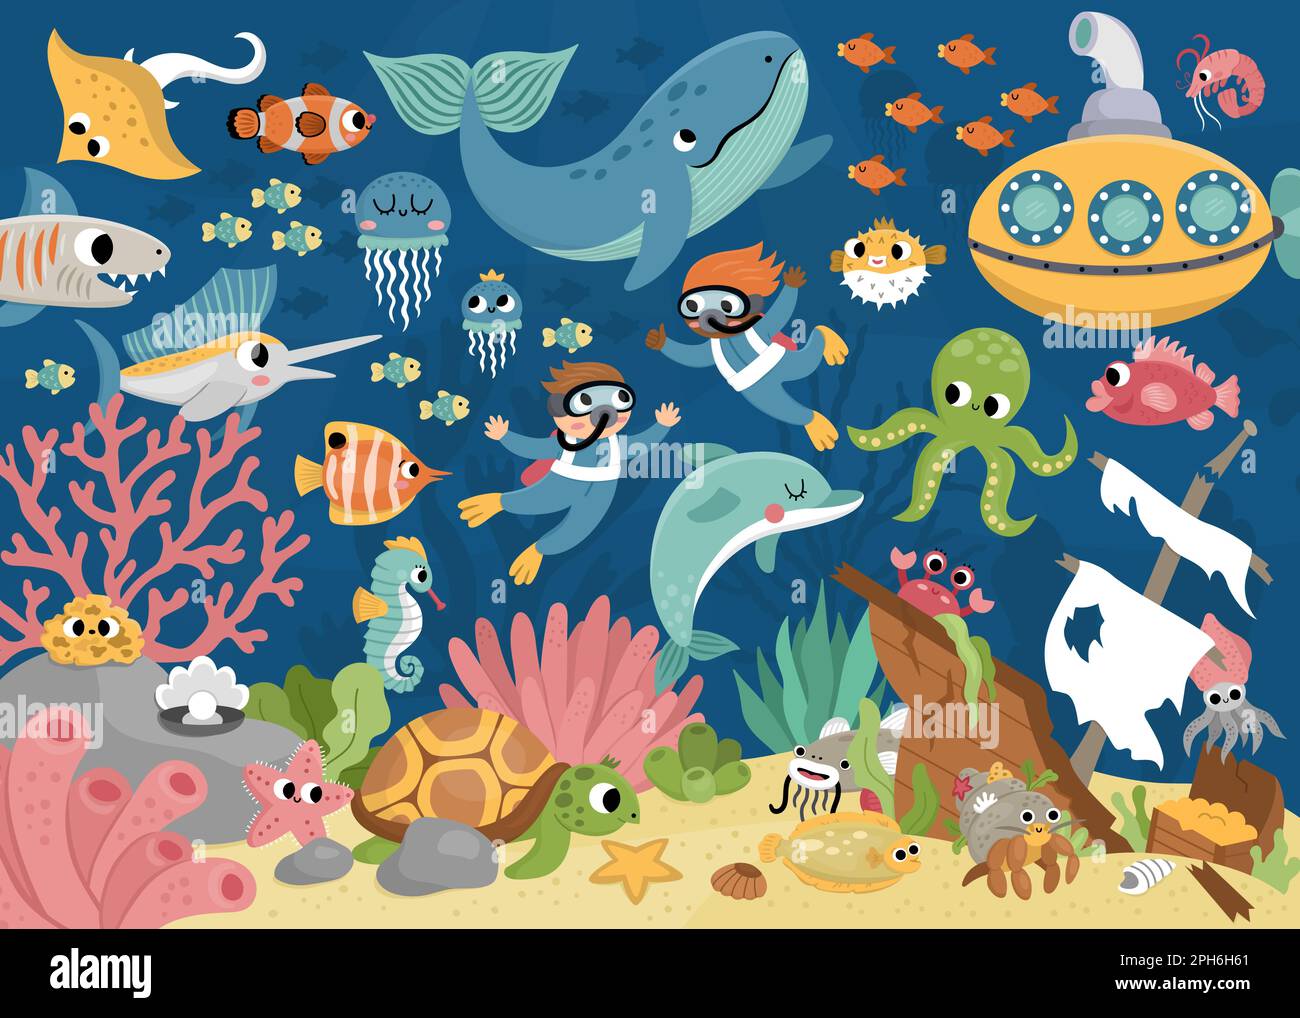 Vector under the sea landscape illustration. Ocean life scene with animals, dolphin, whale, submarine, divers, wrecked ship. Cute horizontal water nat Stock Vector